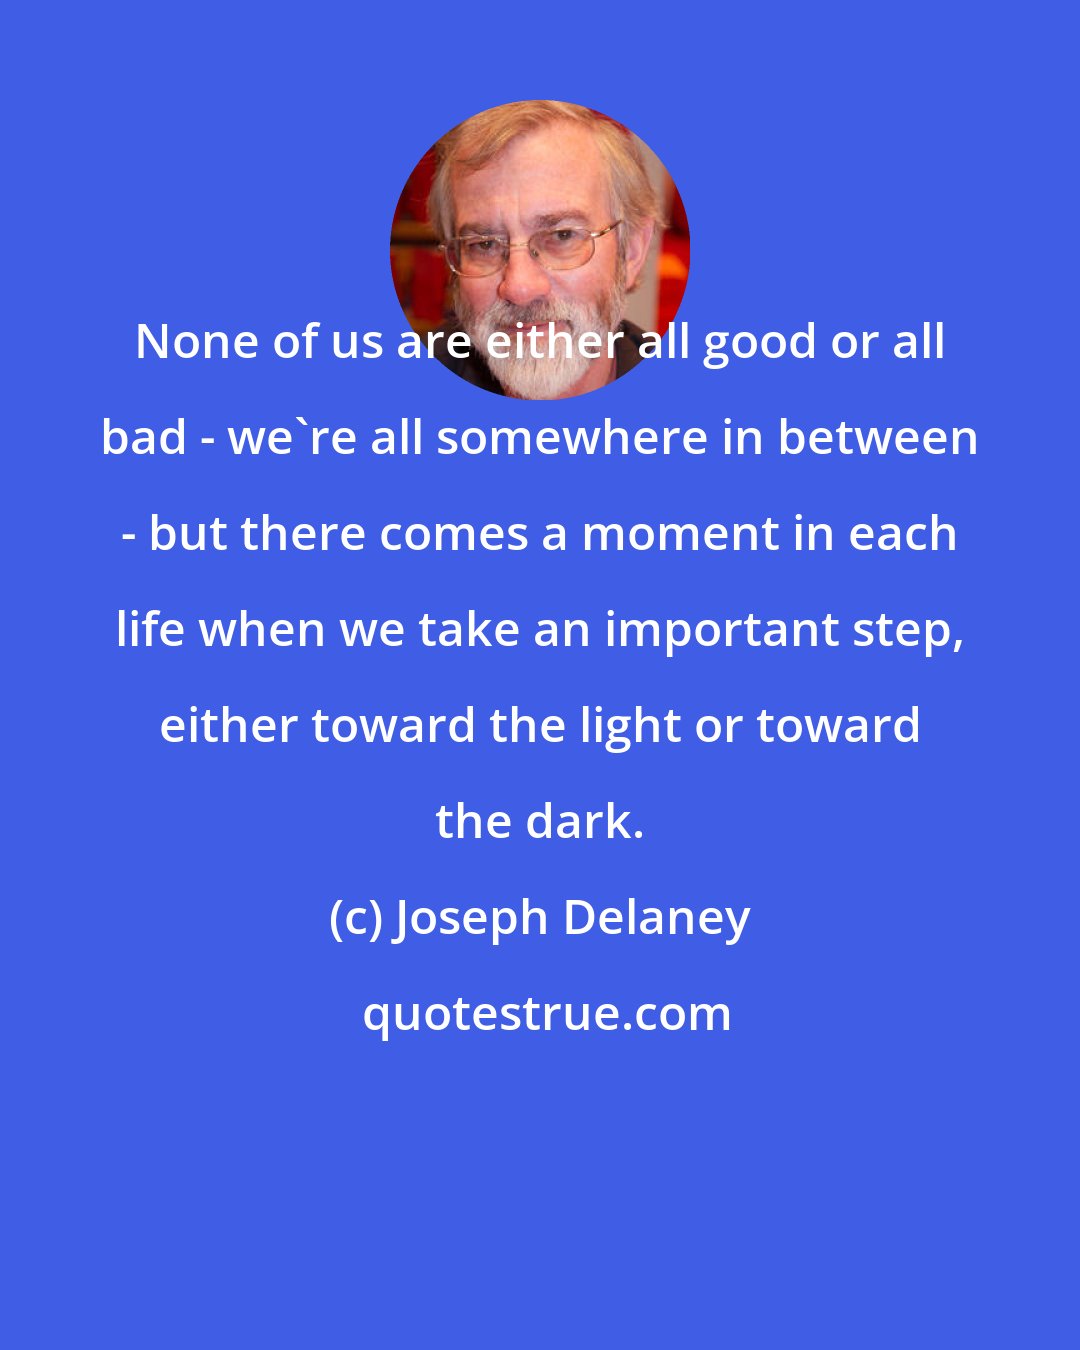 Joseph Delaney: None of us are either all good or all bad - we're all somewhere in between - but there comes a moment in each life when we take an important step, either toward the light or toward the dark.